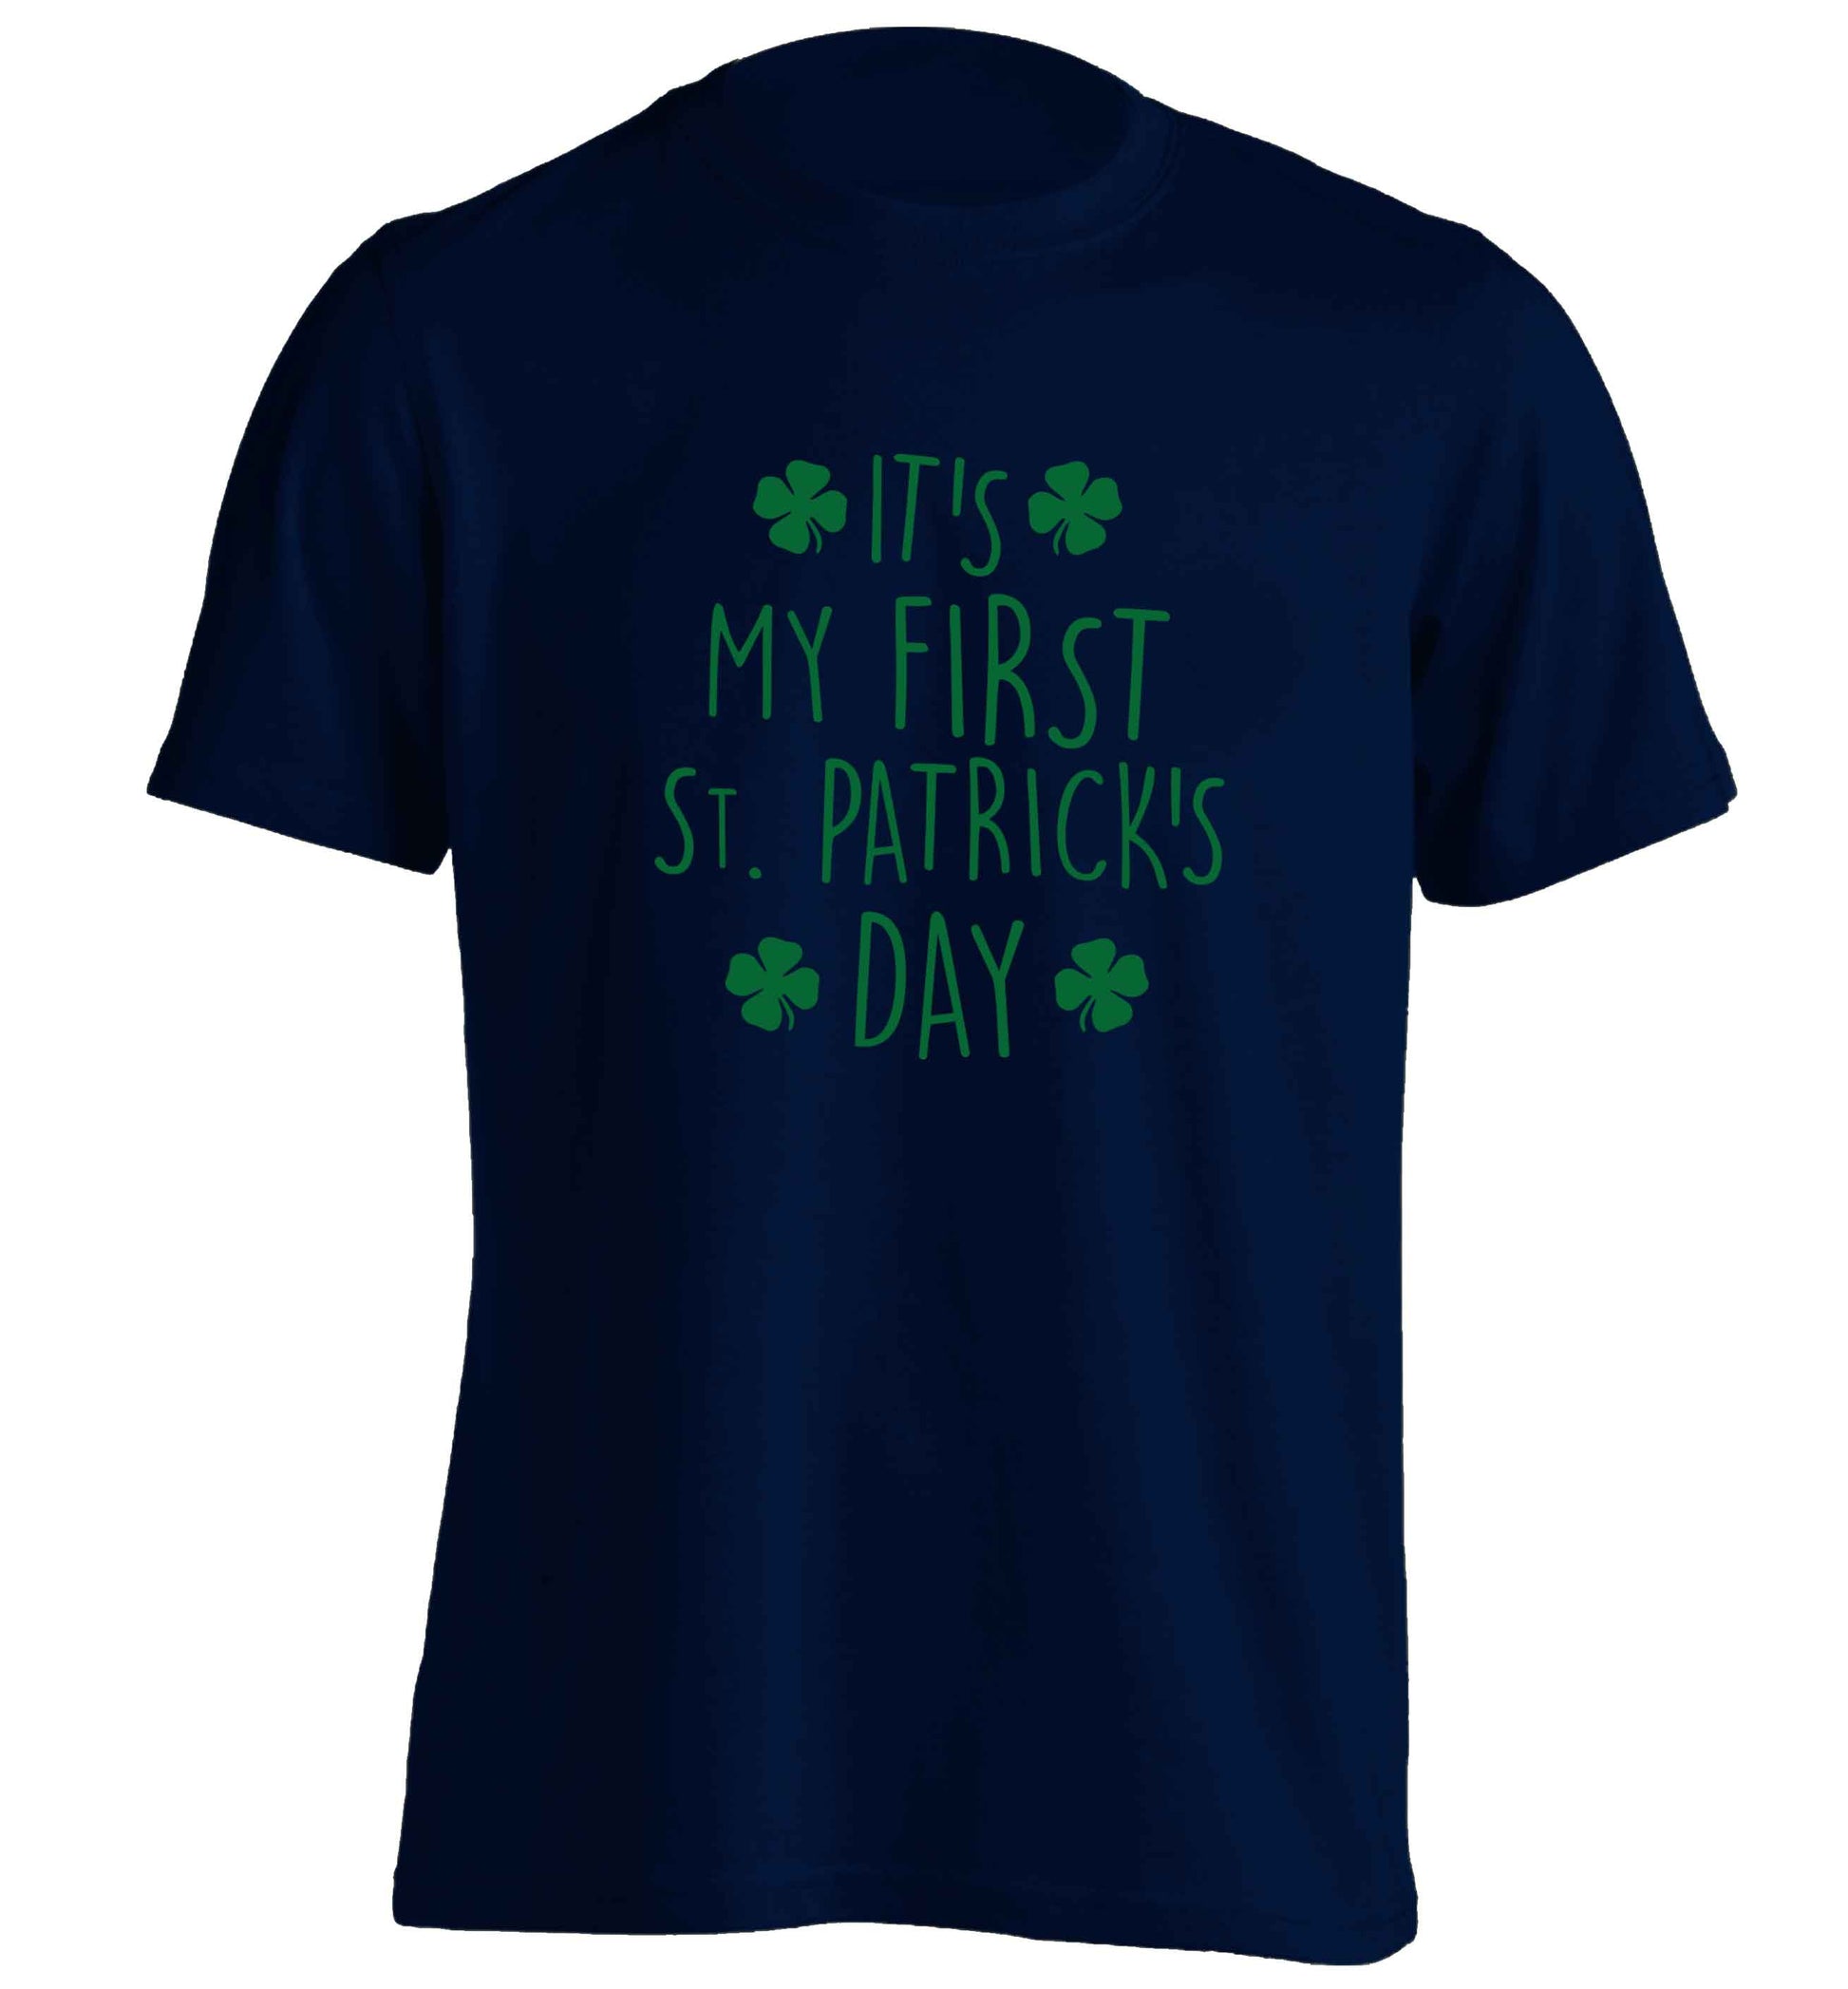 It's my first St.Patrick's day adults unisex navy Tshirt 2XL